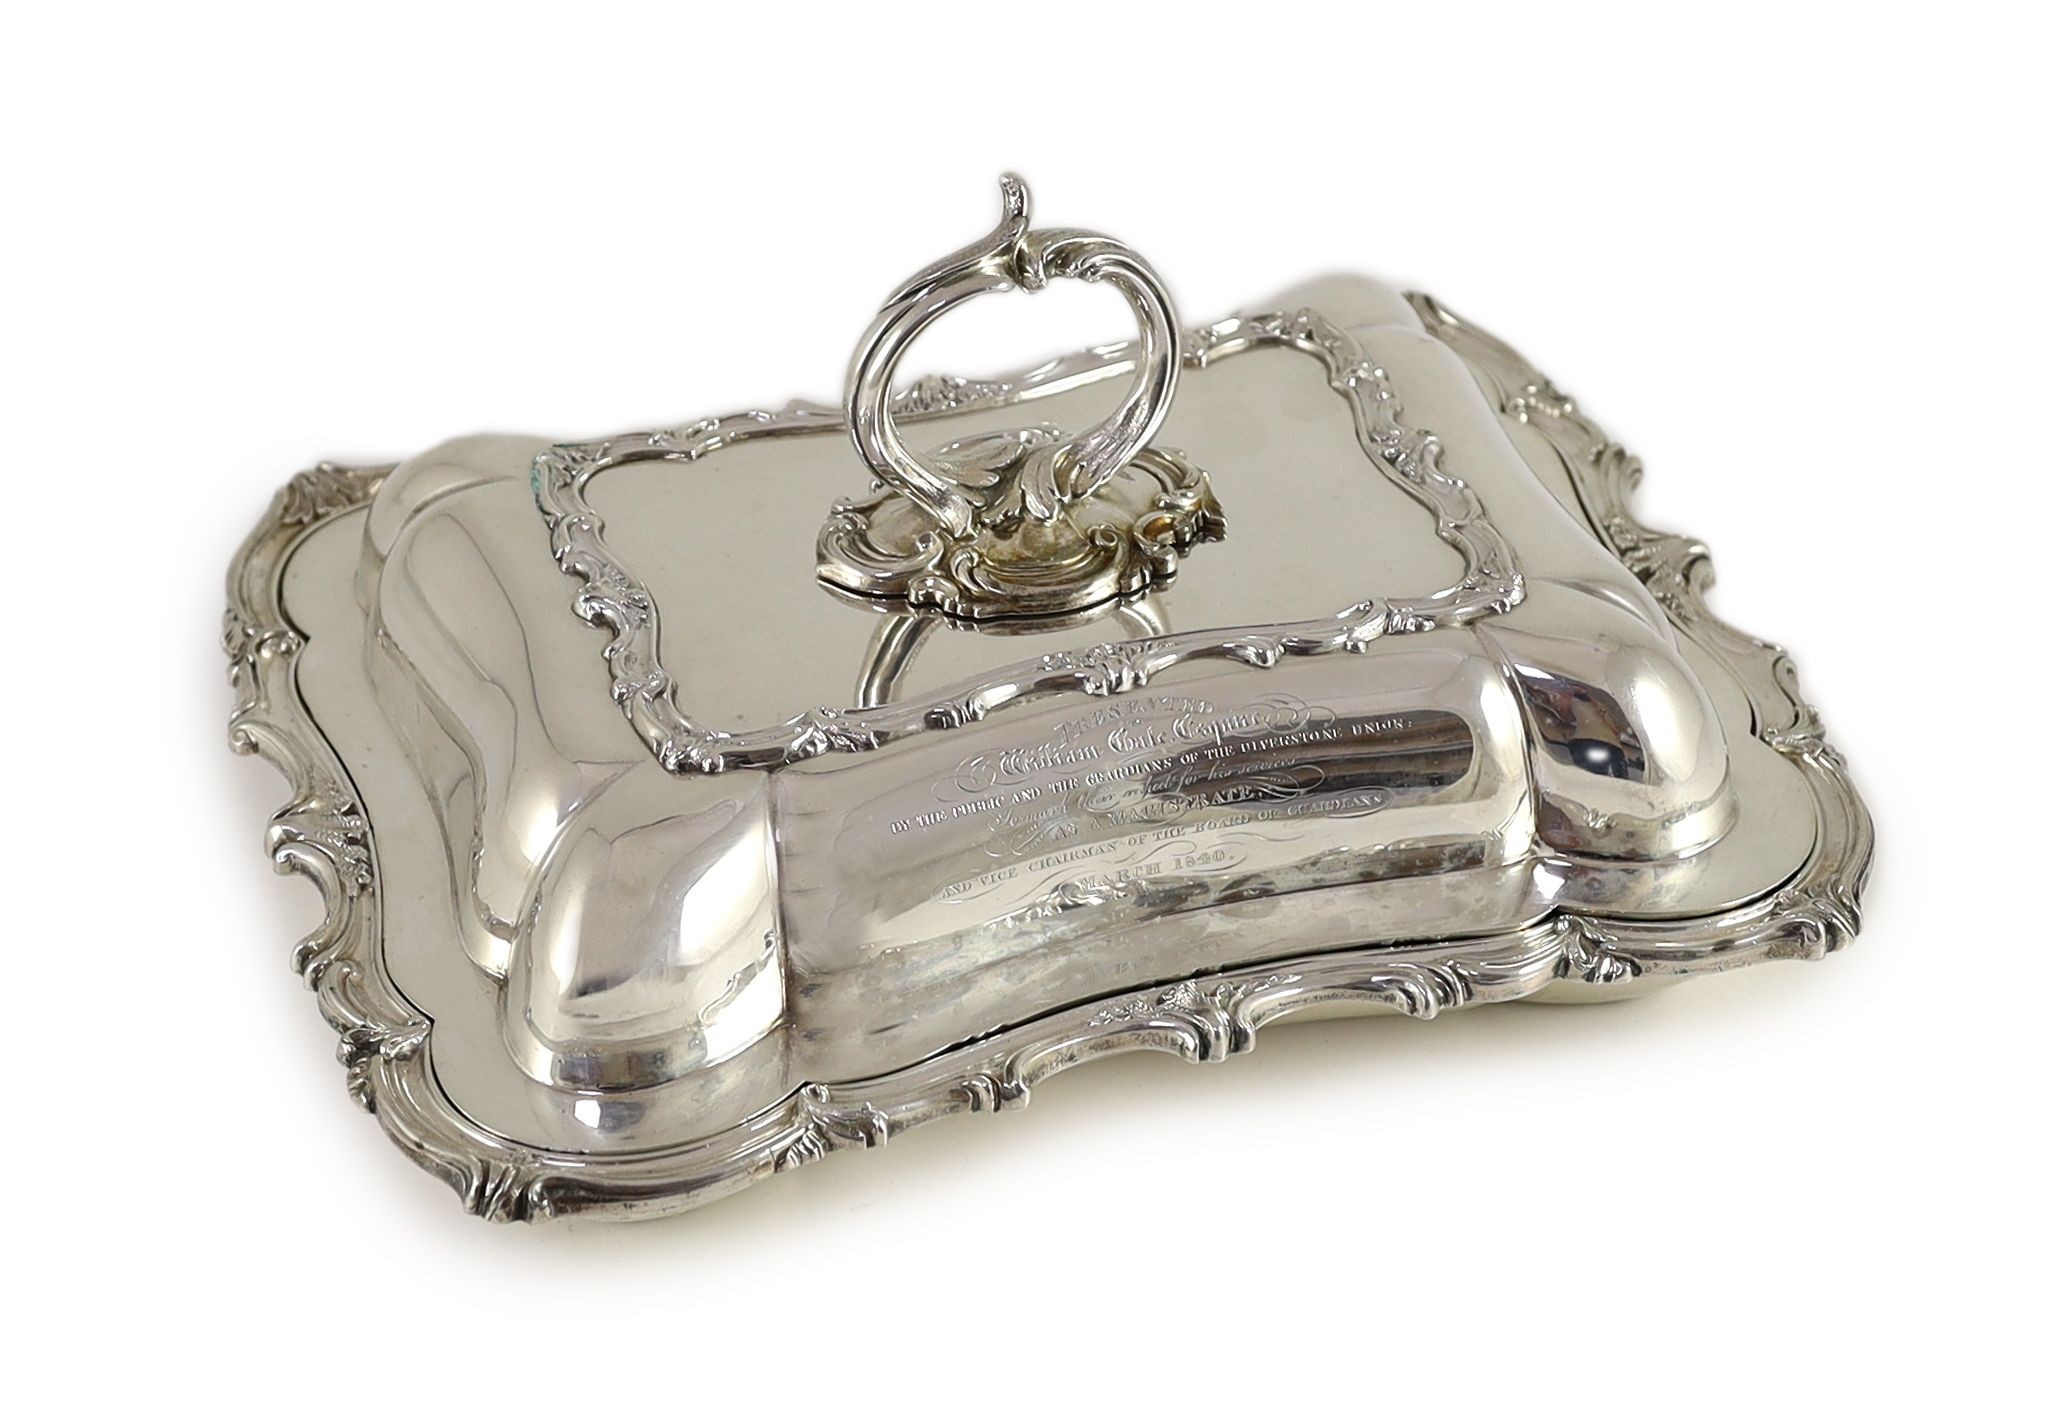 An early Victorian silver tureen and cover with handle, by Samuel Roberts & Co, with engraved presentation inscription and crest, relating to the Ulverston Union